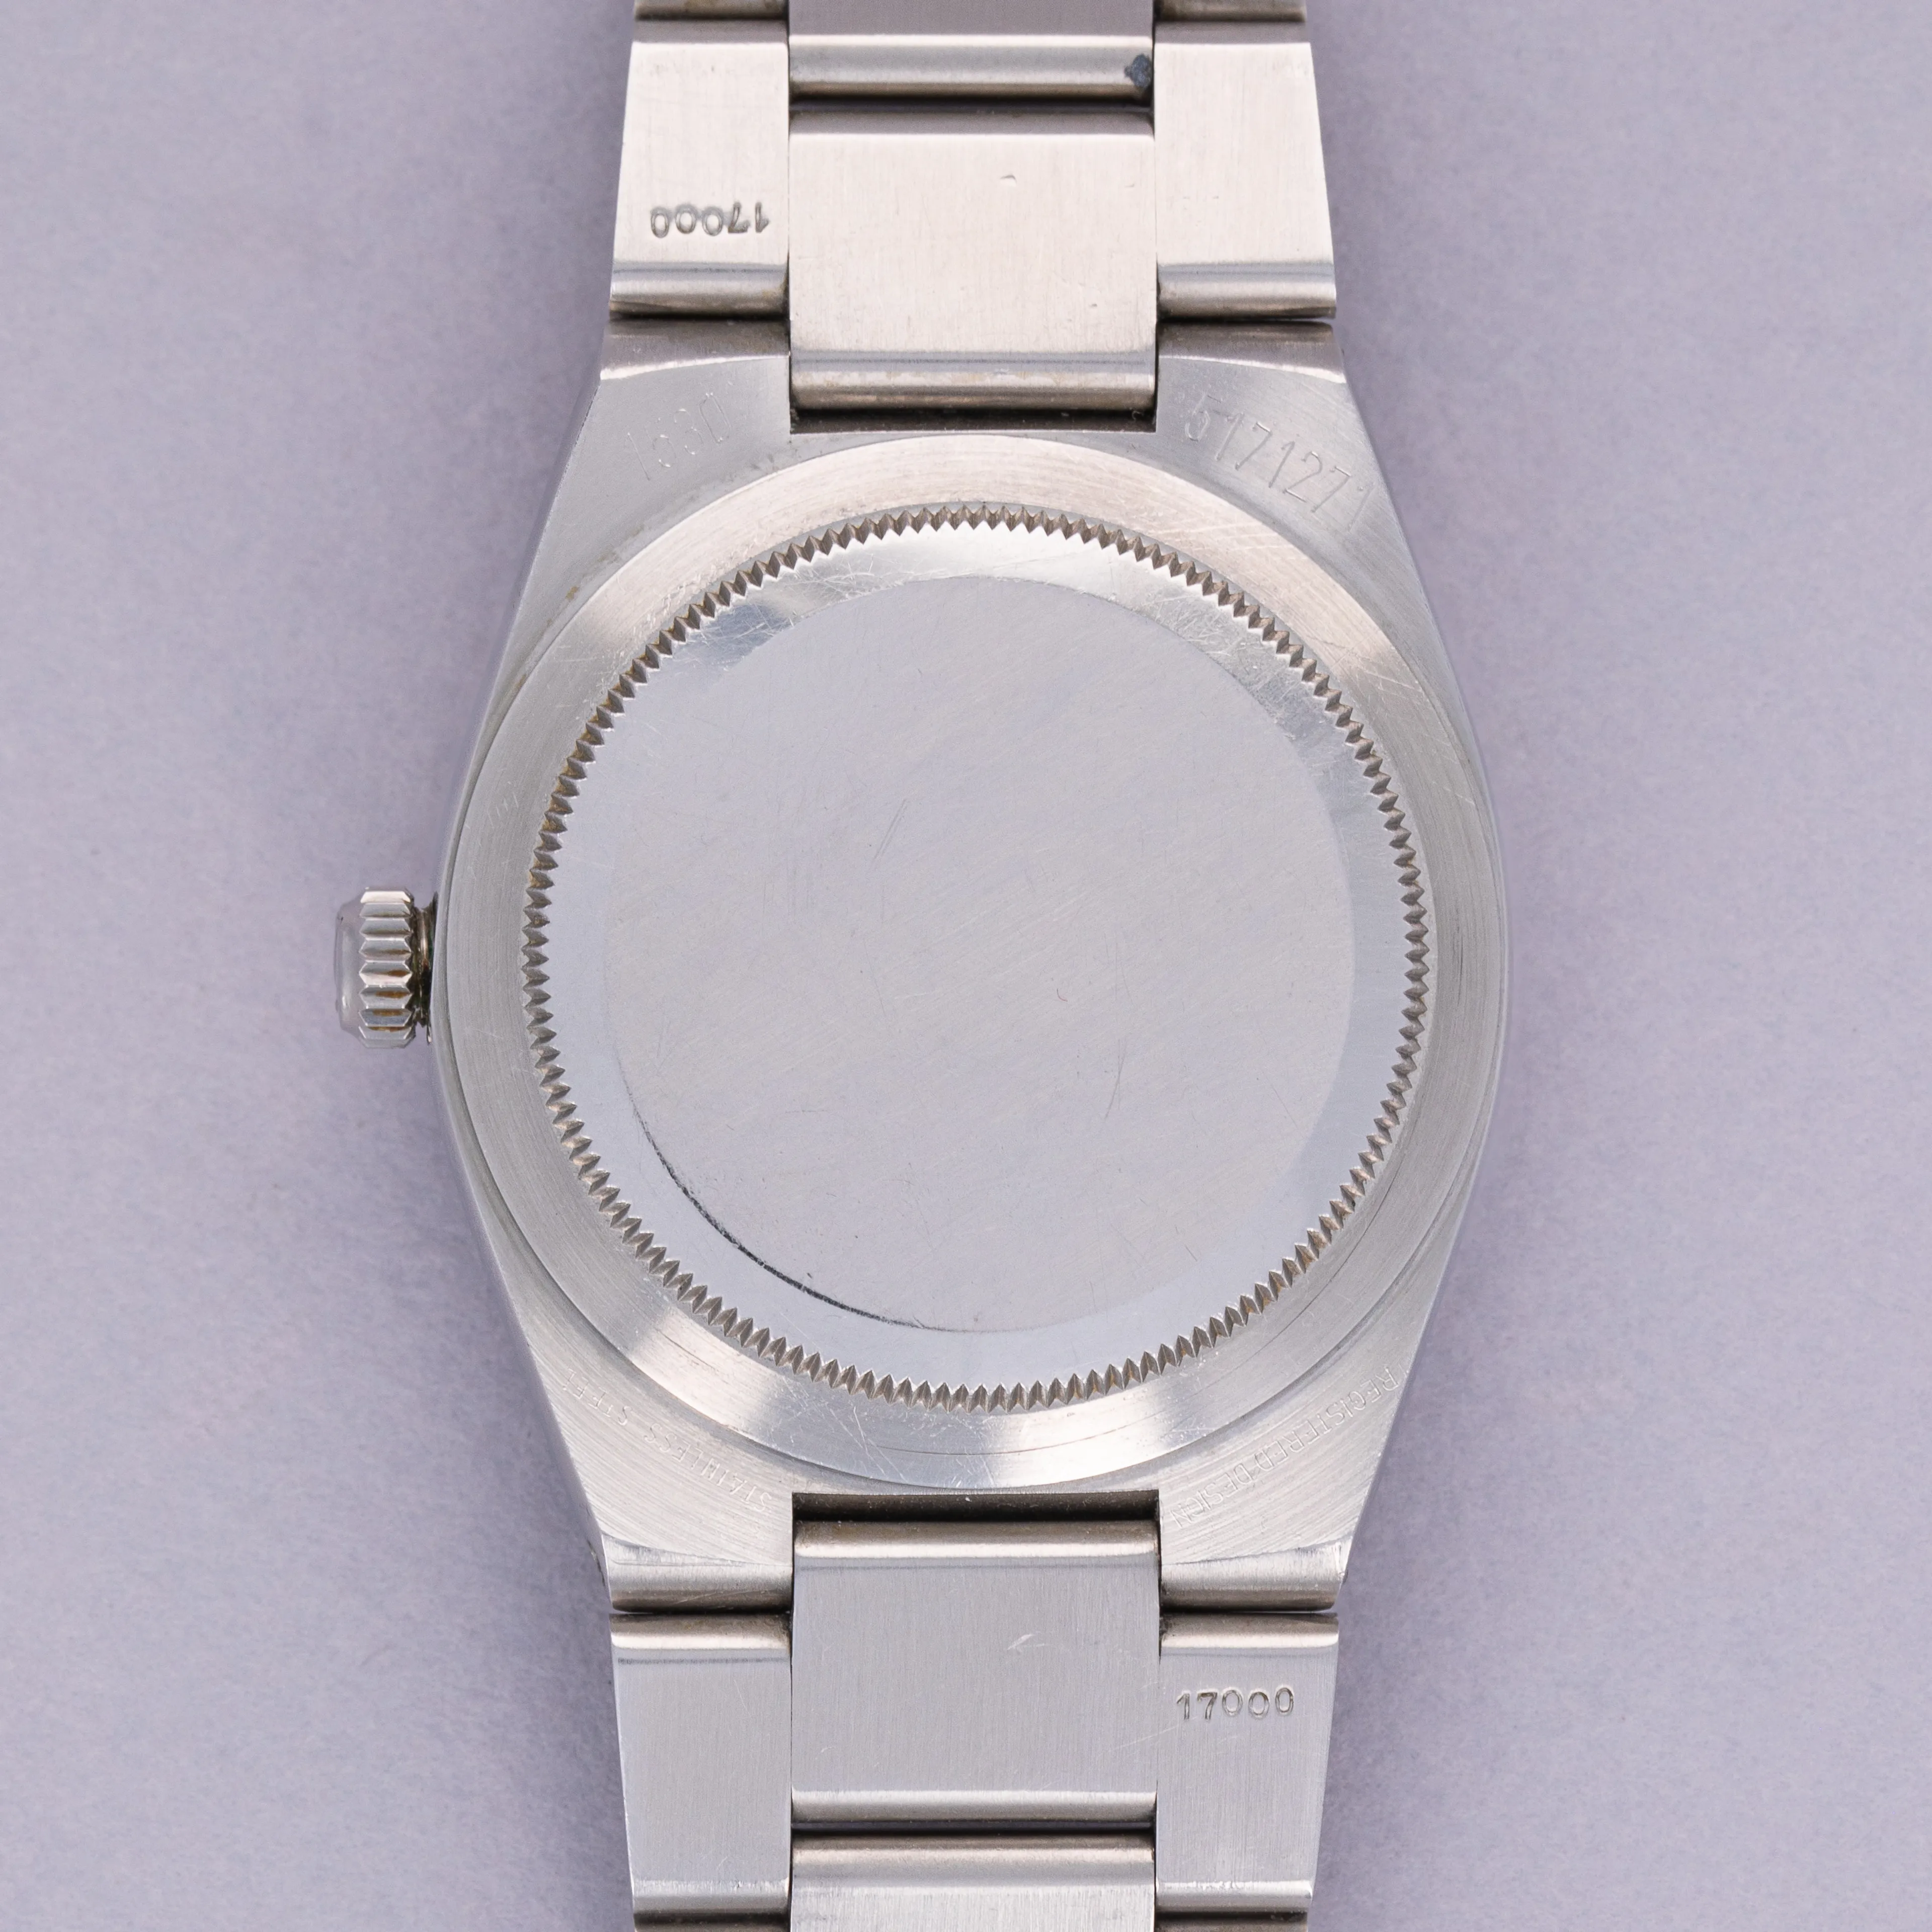 Rolex Oyster Perpetual Date 1530 36mm Stainless steel Silver 5